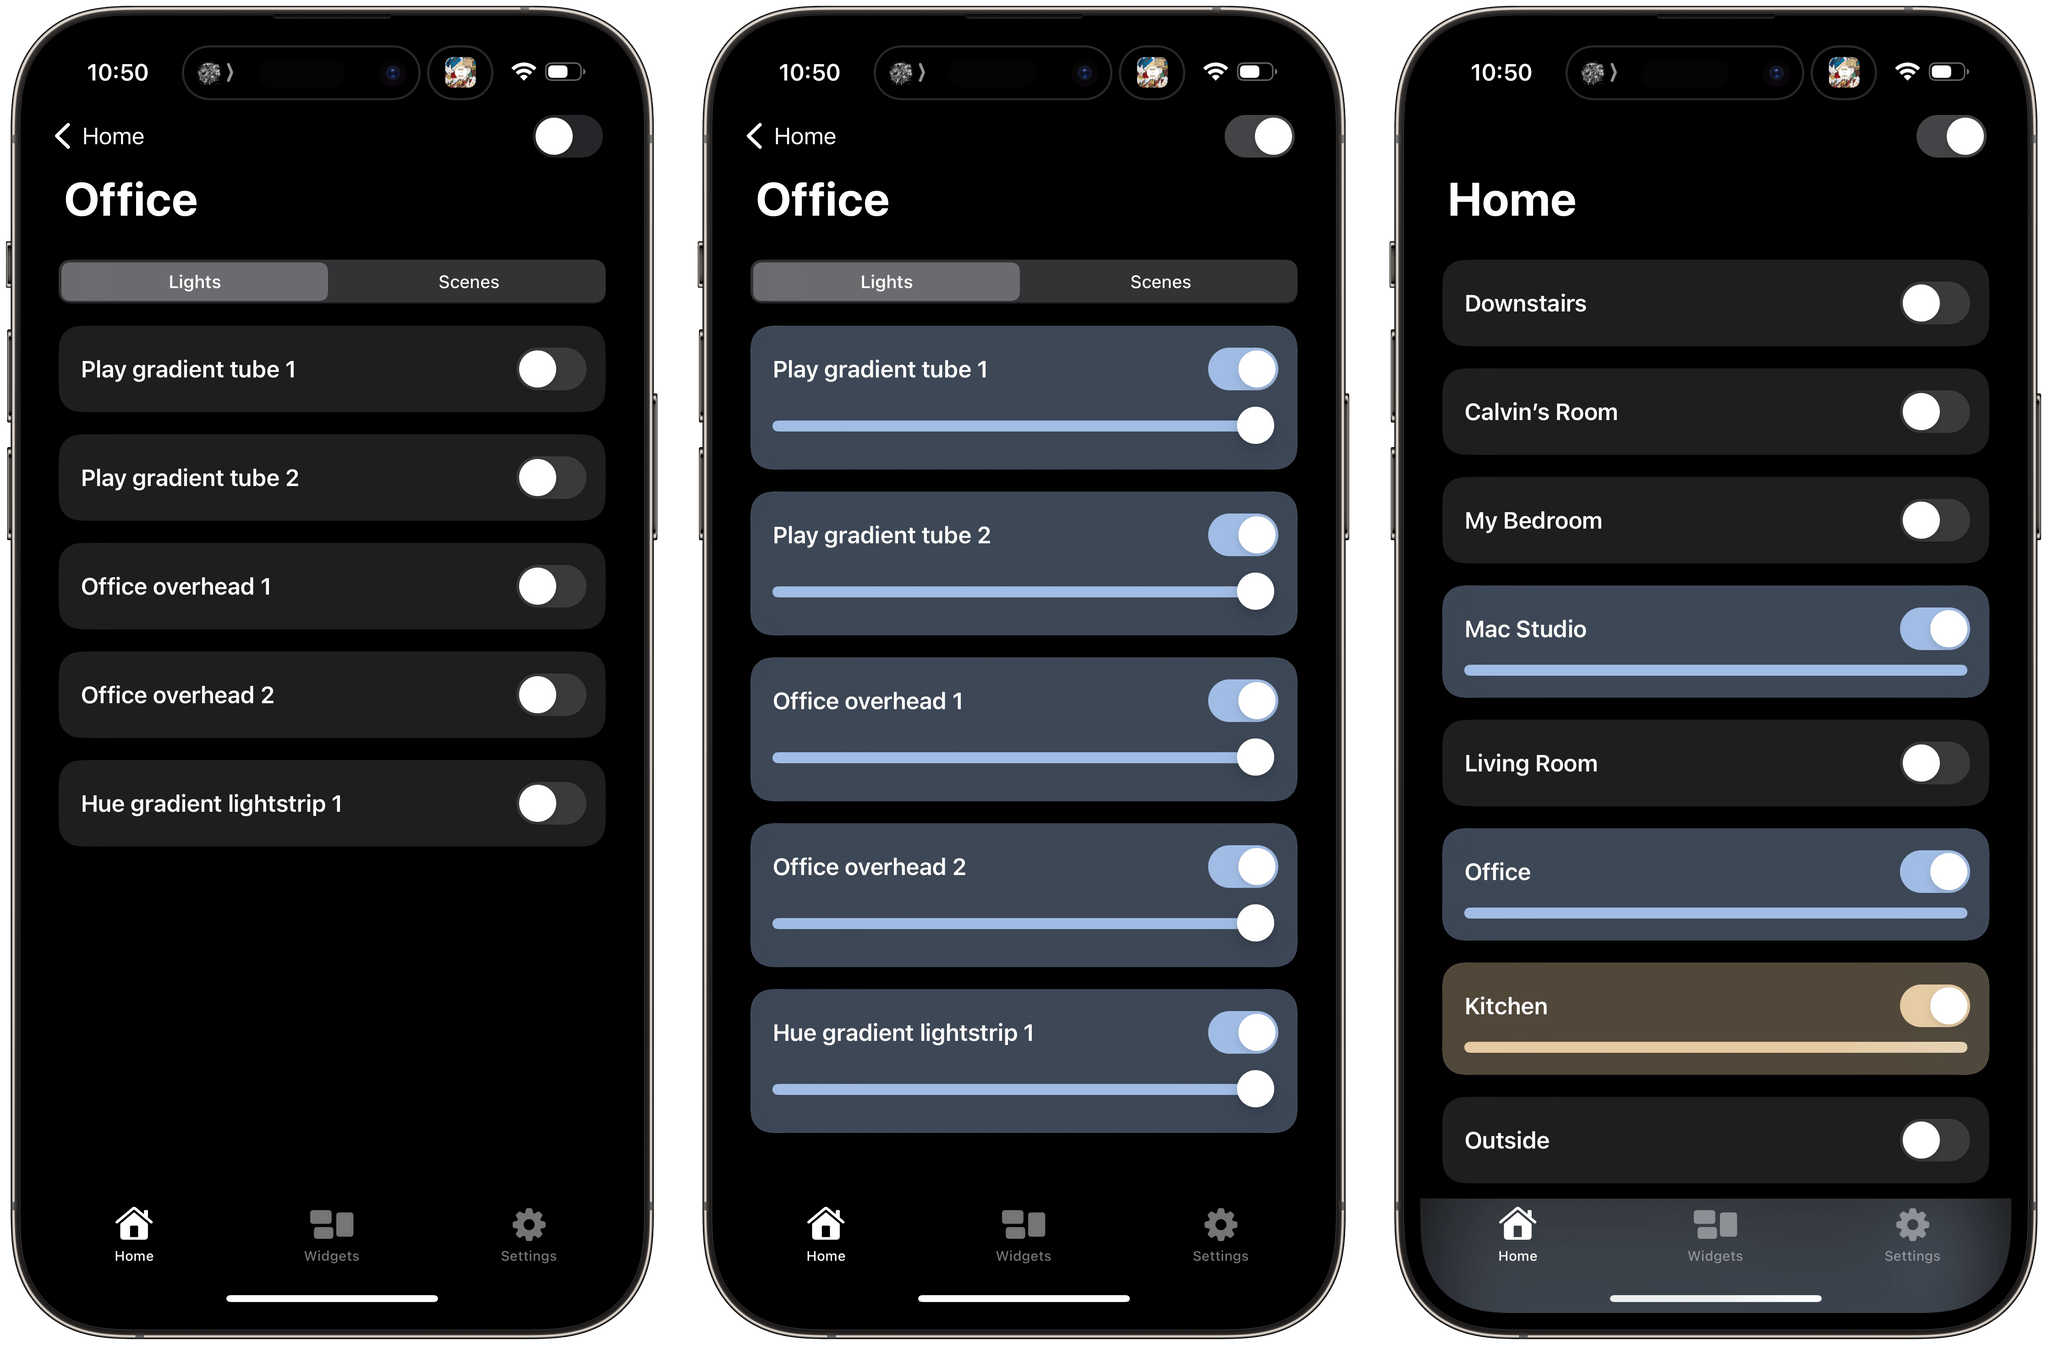 Controlling lights and scenes from Home Widgets.